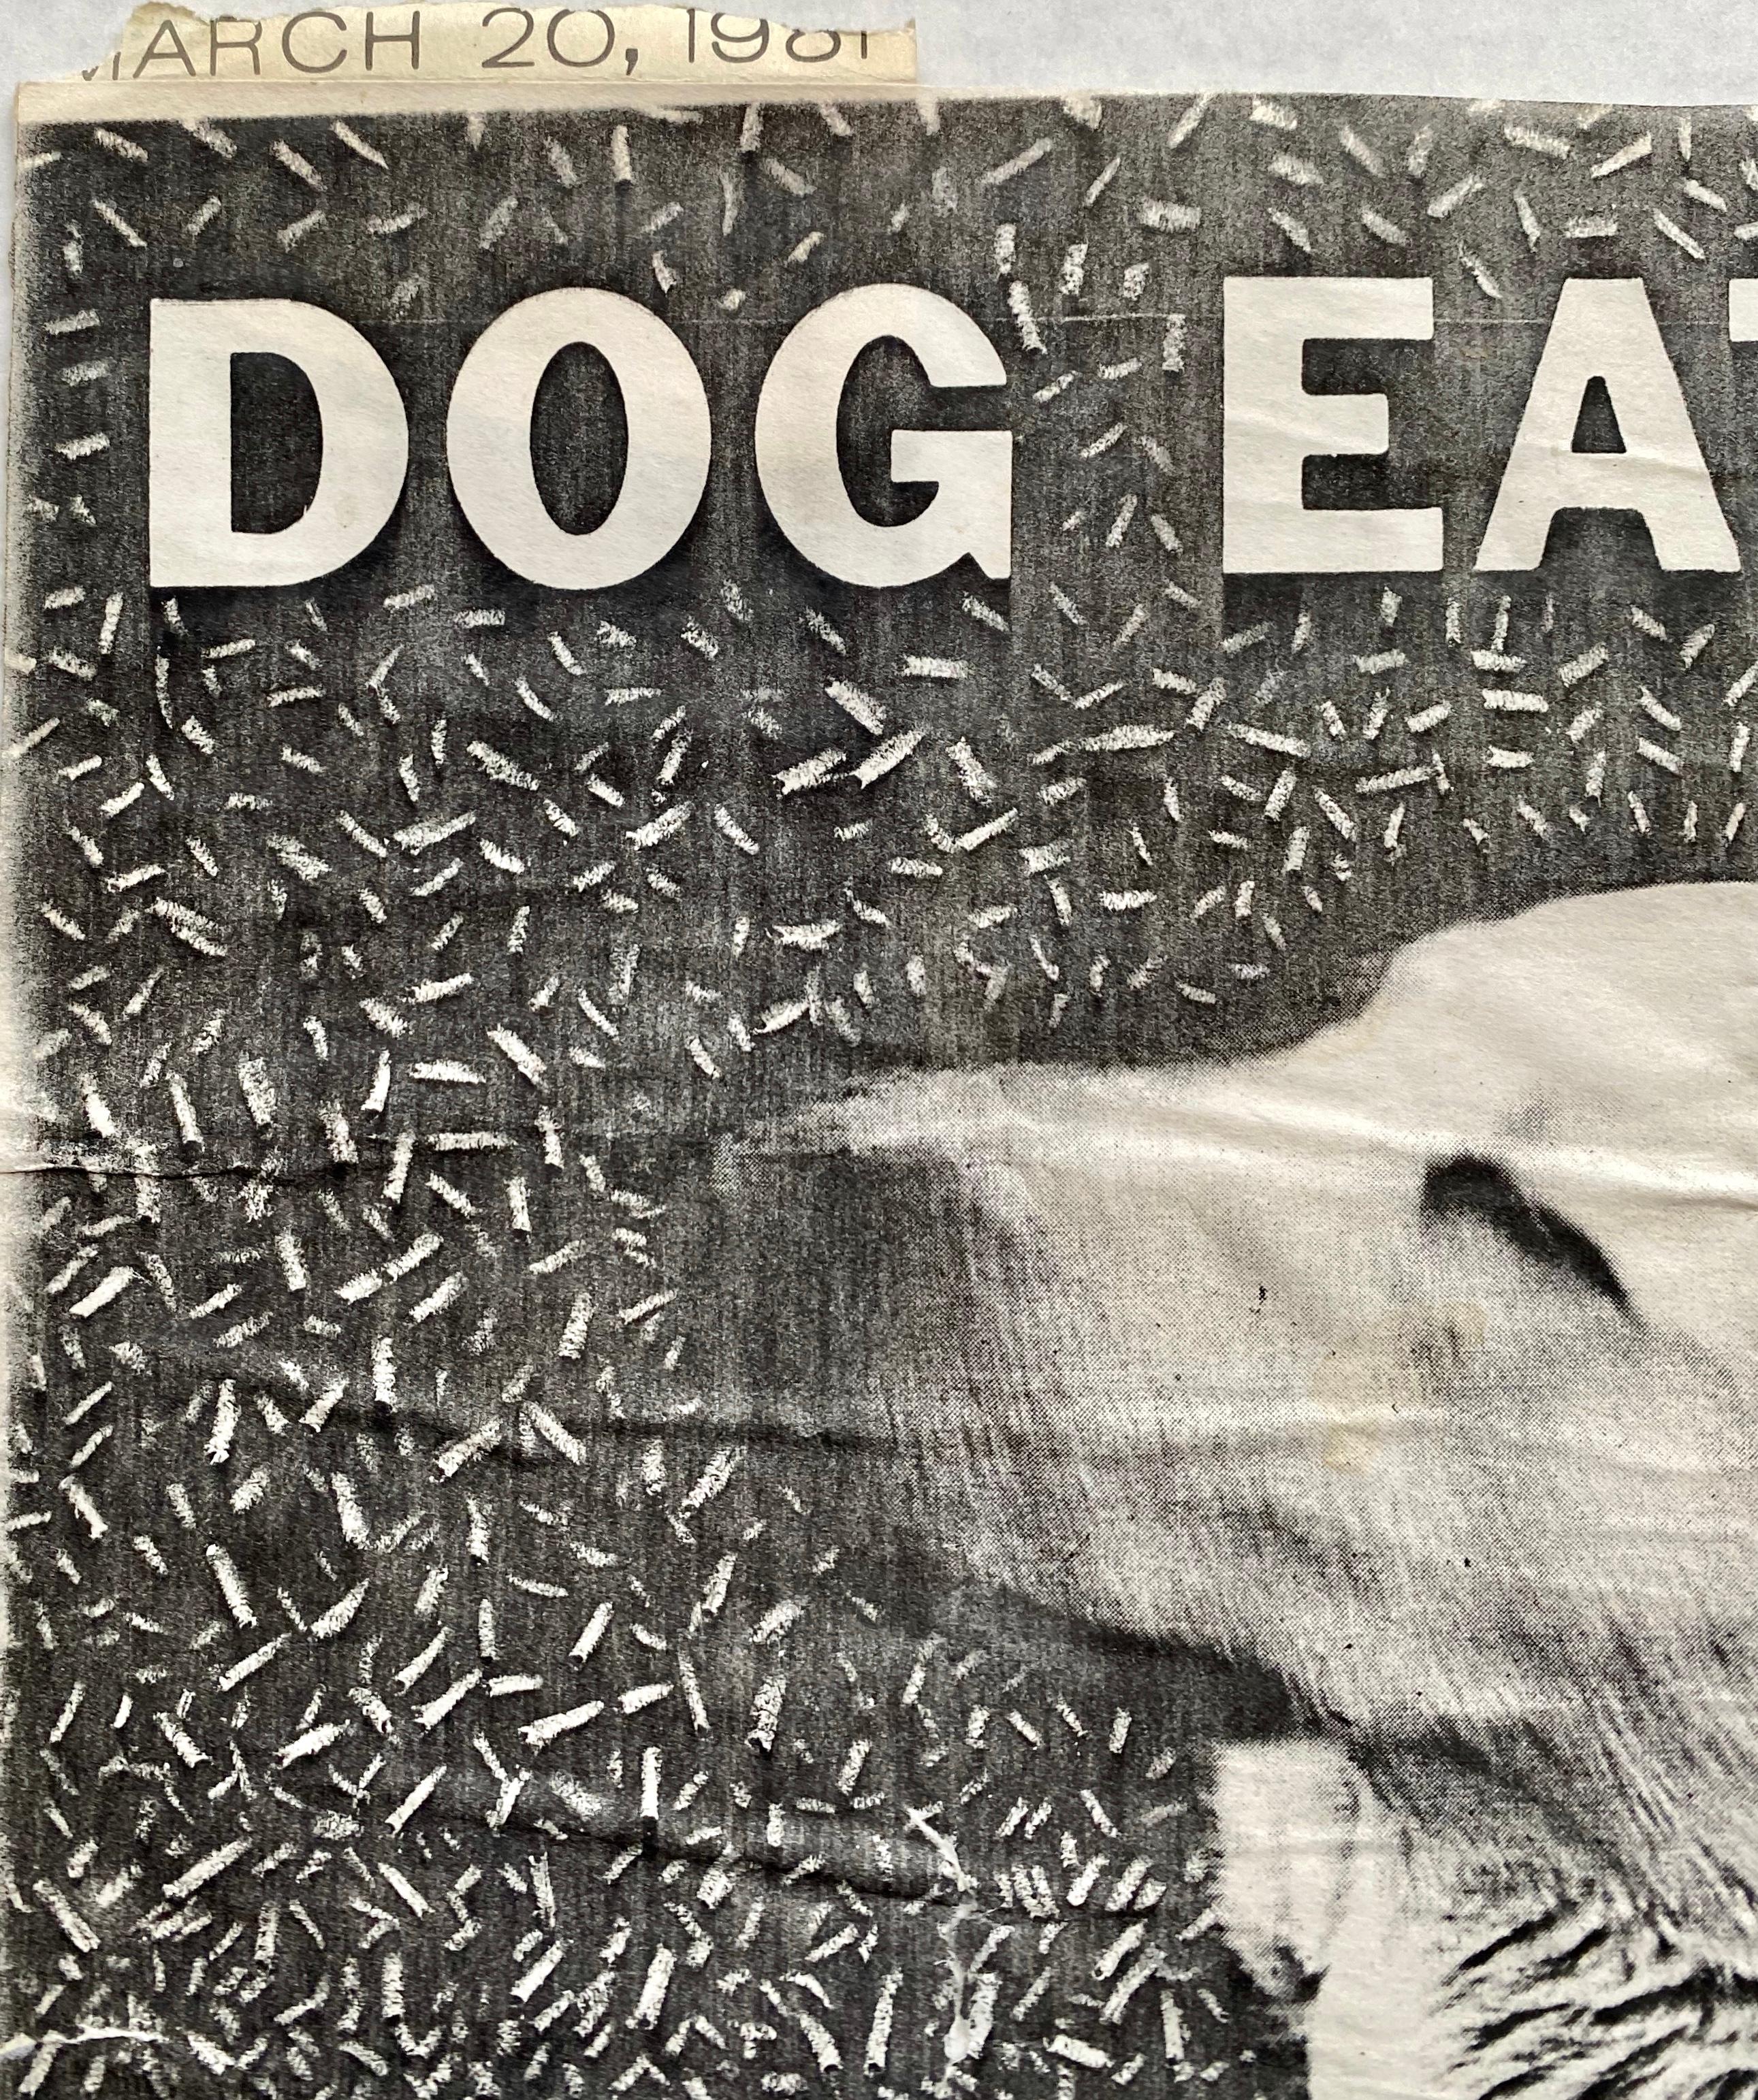 Rare vintage original CBGB club flyer NYC, 1981:
“Dog Eat Dog” at CBGB 1981.

Measures: Offset print. 8.5 x 11 inches.
Fair to good overall vintage condition.
Guaranteed original.

Founded on the Bowery in New York City by Hilly Kristal in